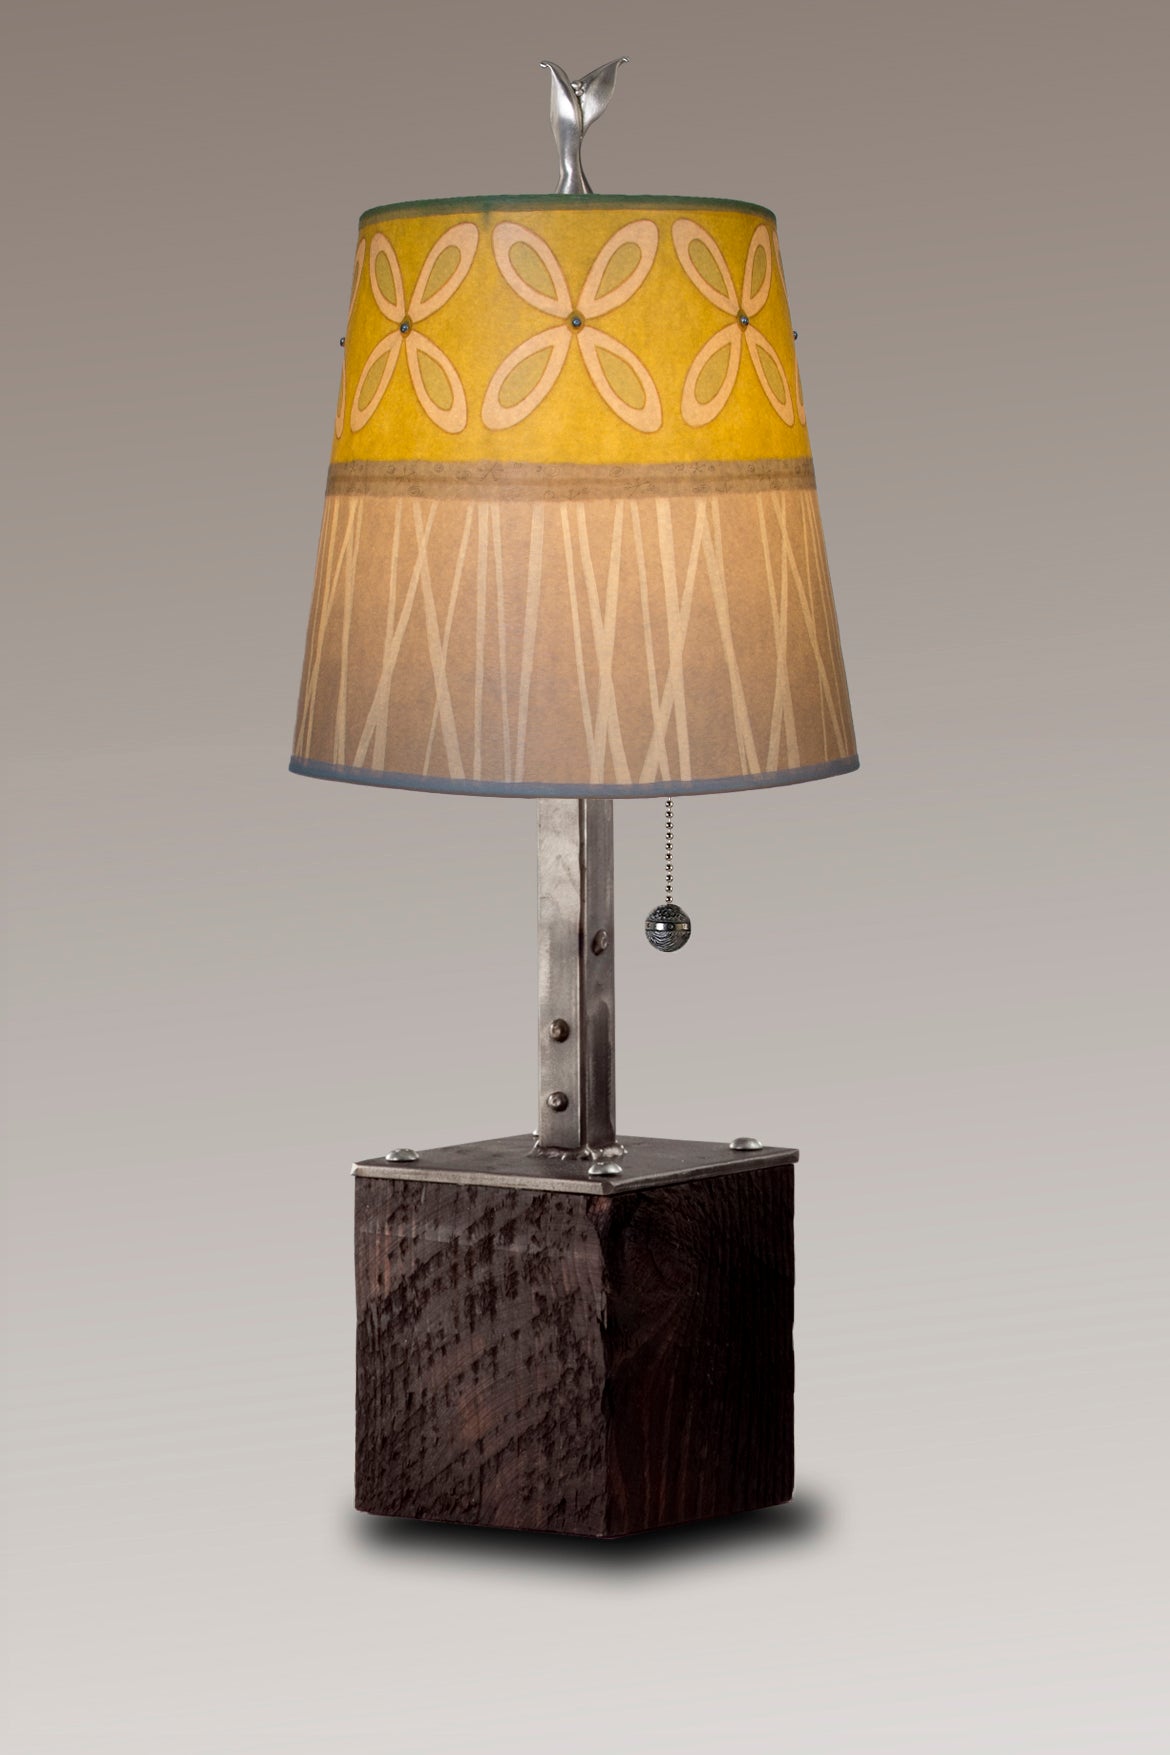 Janna Ugone &amp; Co Table Lamps Steel Table Lamp on Reclaimed Wood with Small Drum Shade in Kiwi